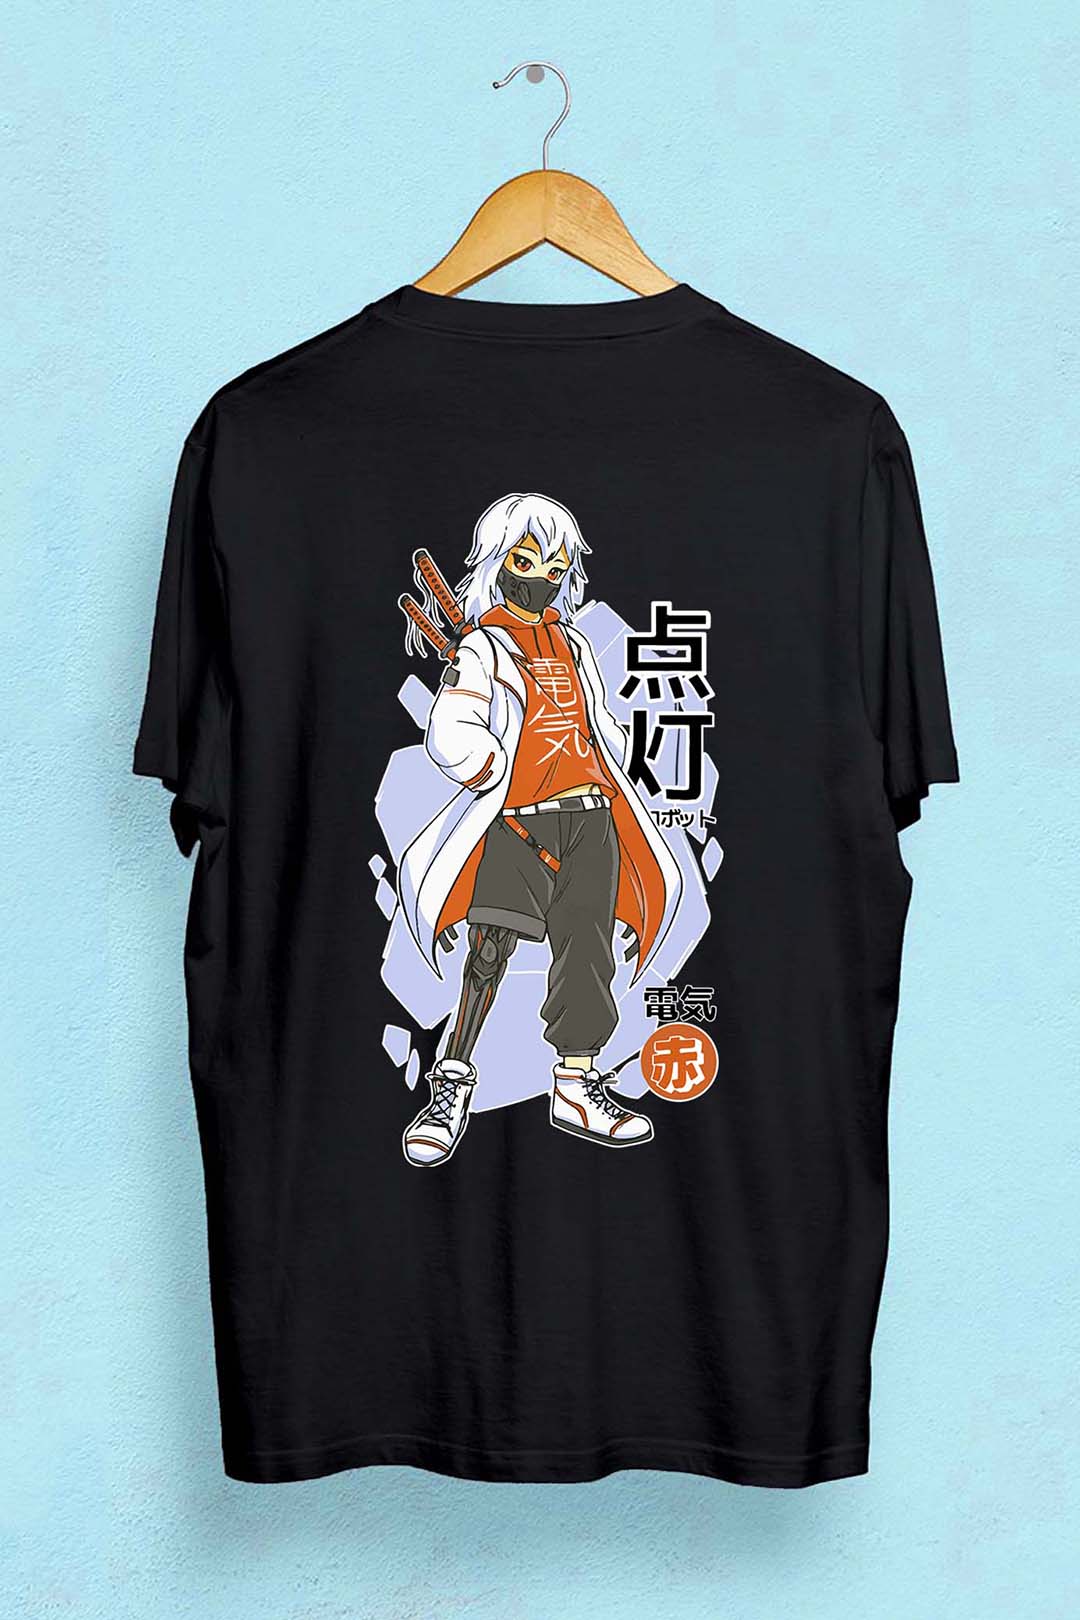 Buy ComicSense.xyz Unisex One Piece Anime Oversized T Shirts for Men and  Women, Adventure Printed Drop Shoulder Tshirt - Small White at Amazon.in